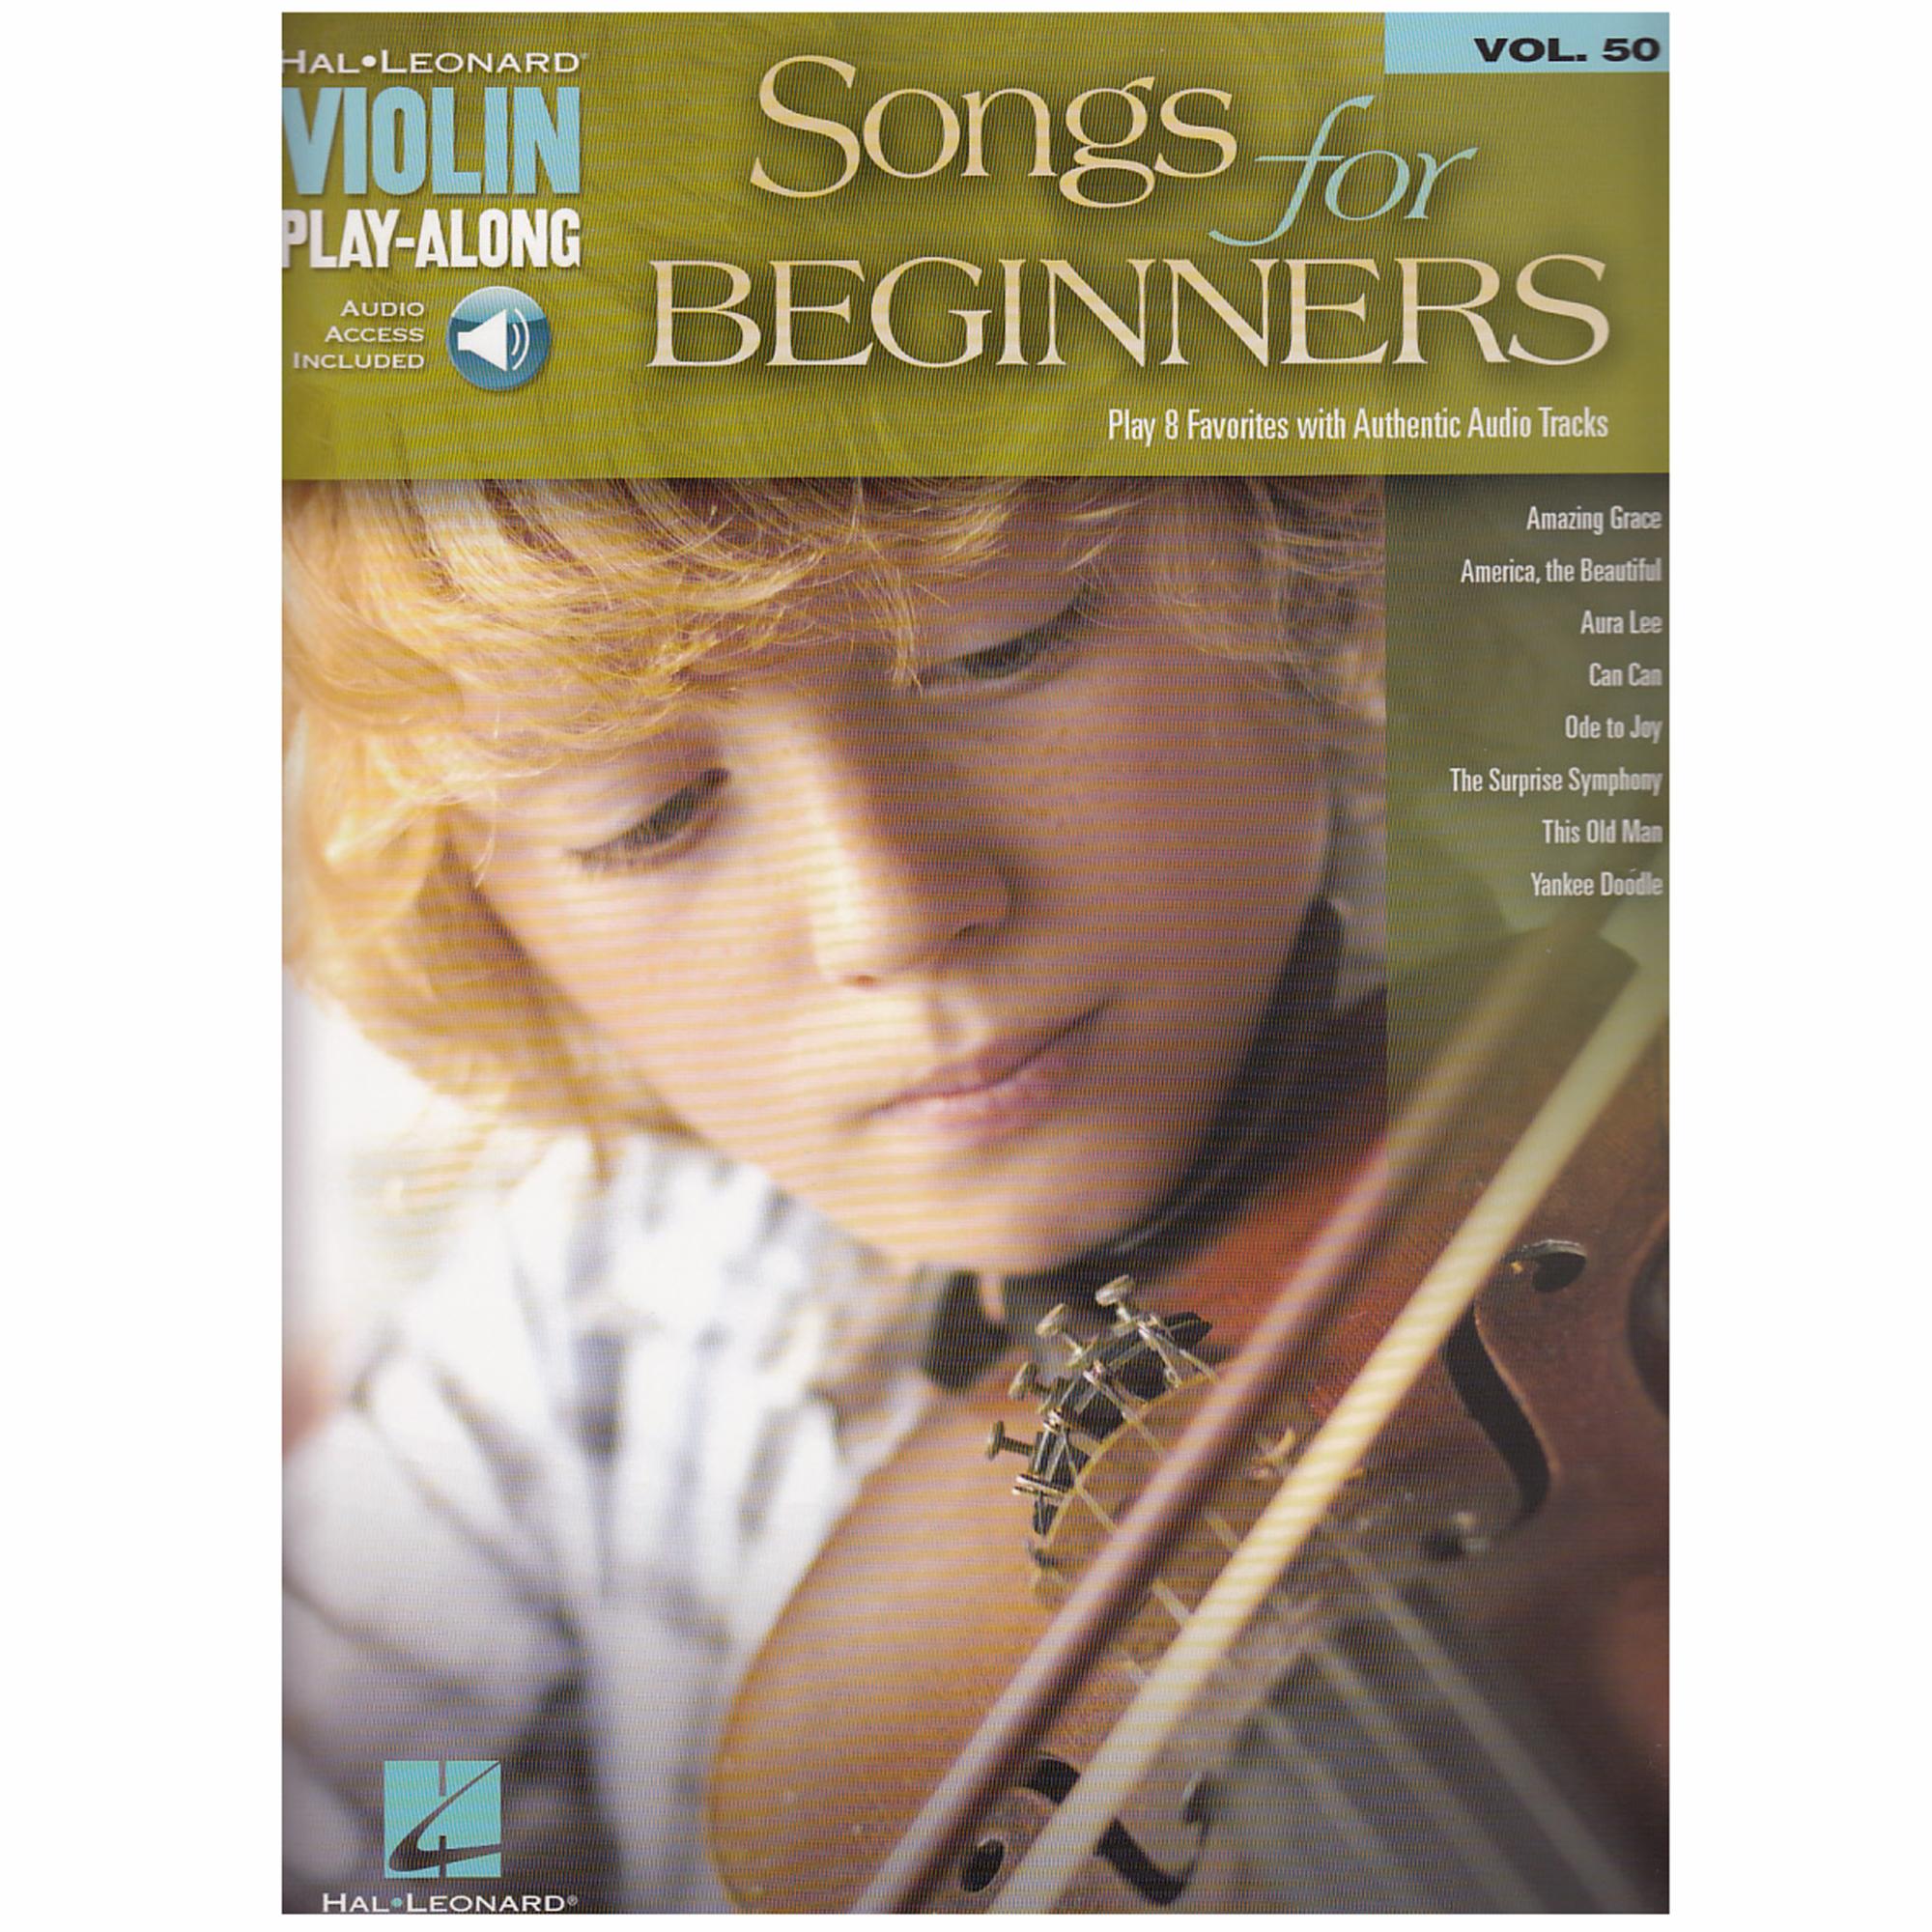 Songs for Beginners. #50 of the Play Along Series